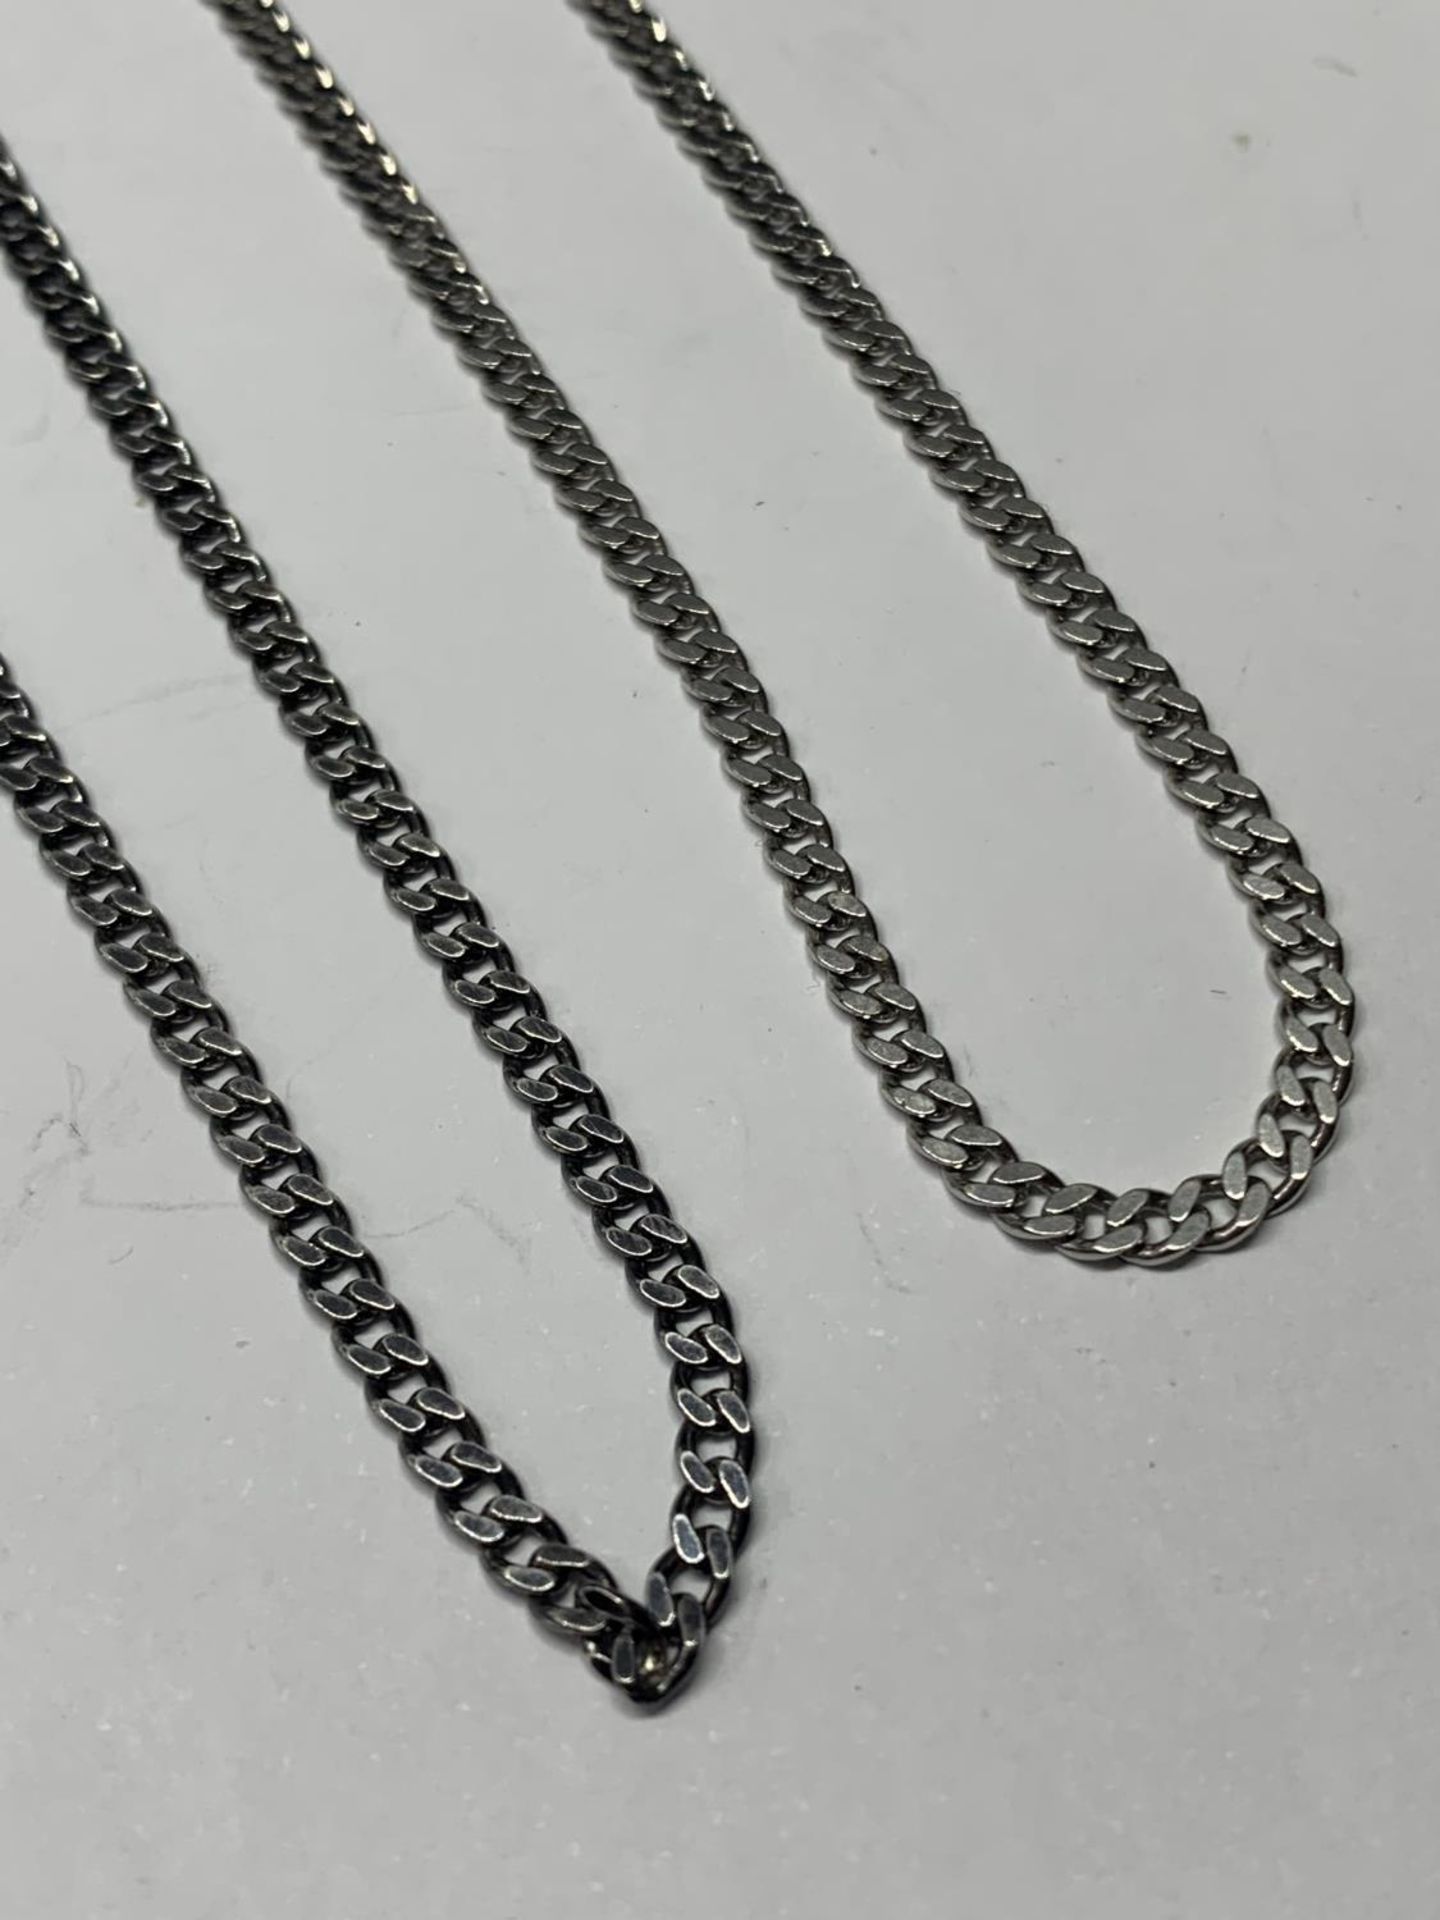 TWO SILVER FLAT LINK CHAINS - Image 2 of 3